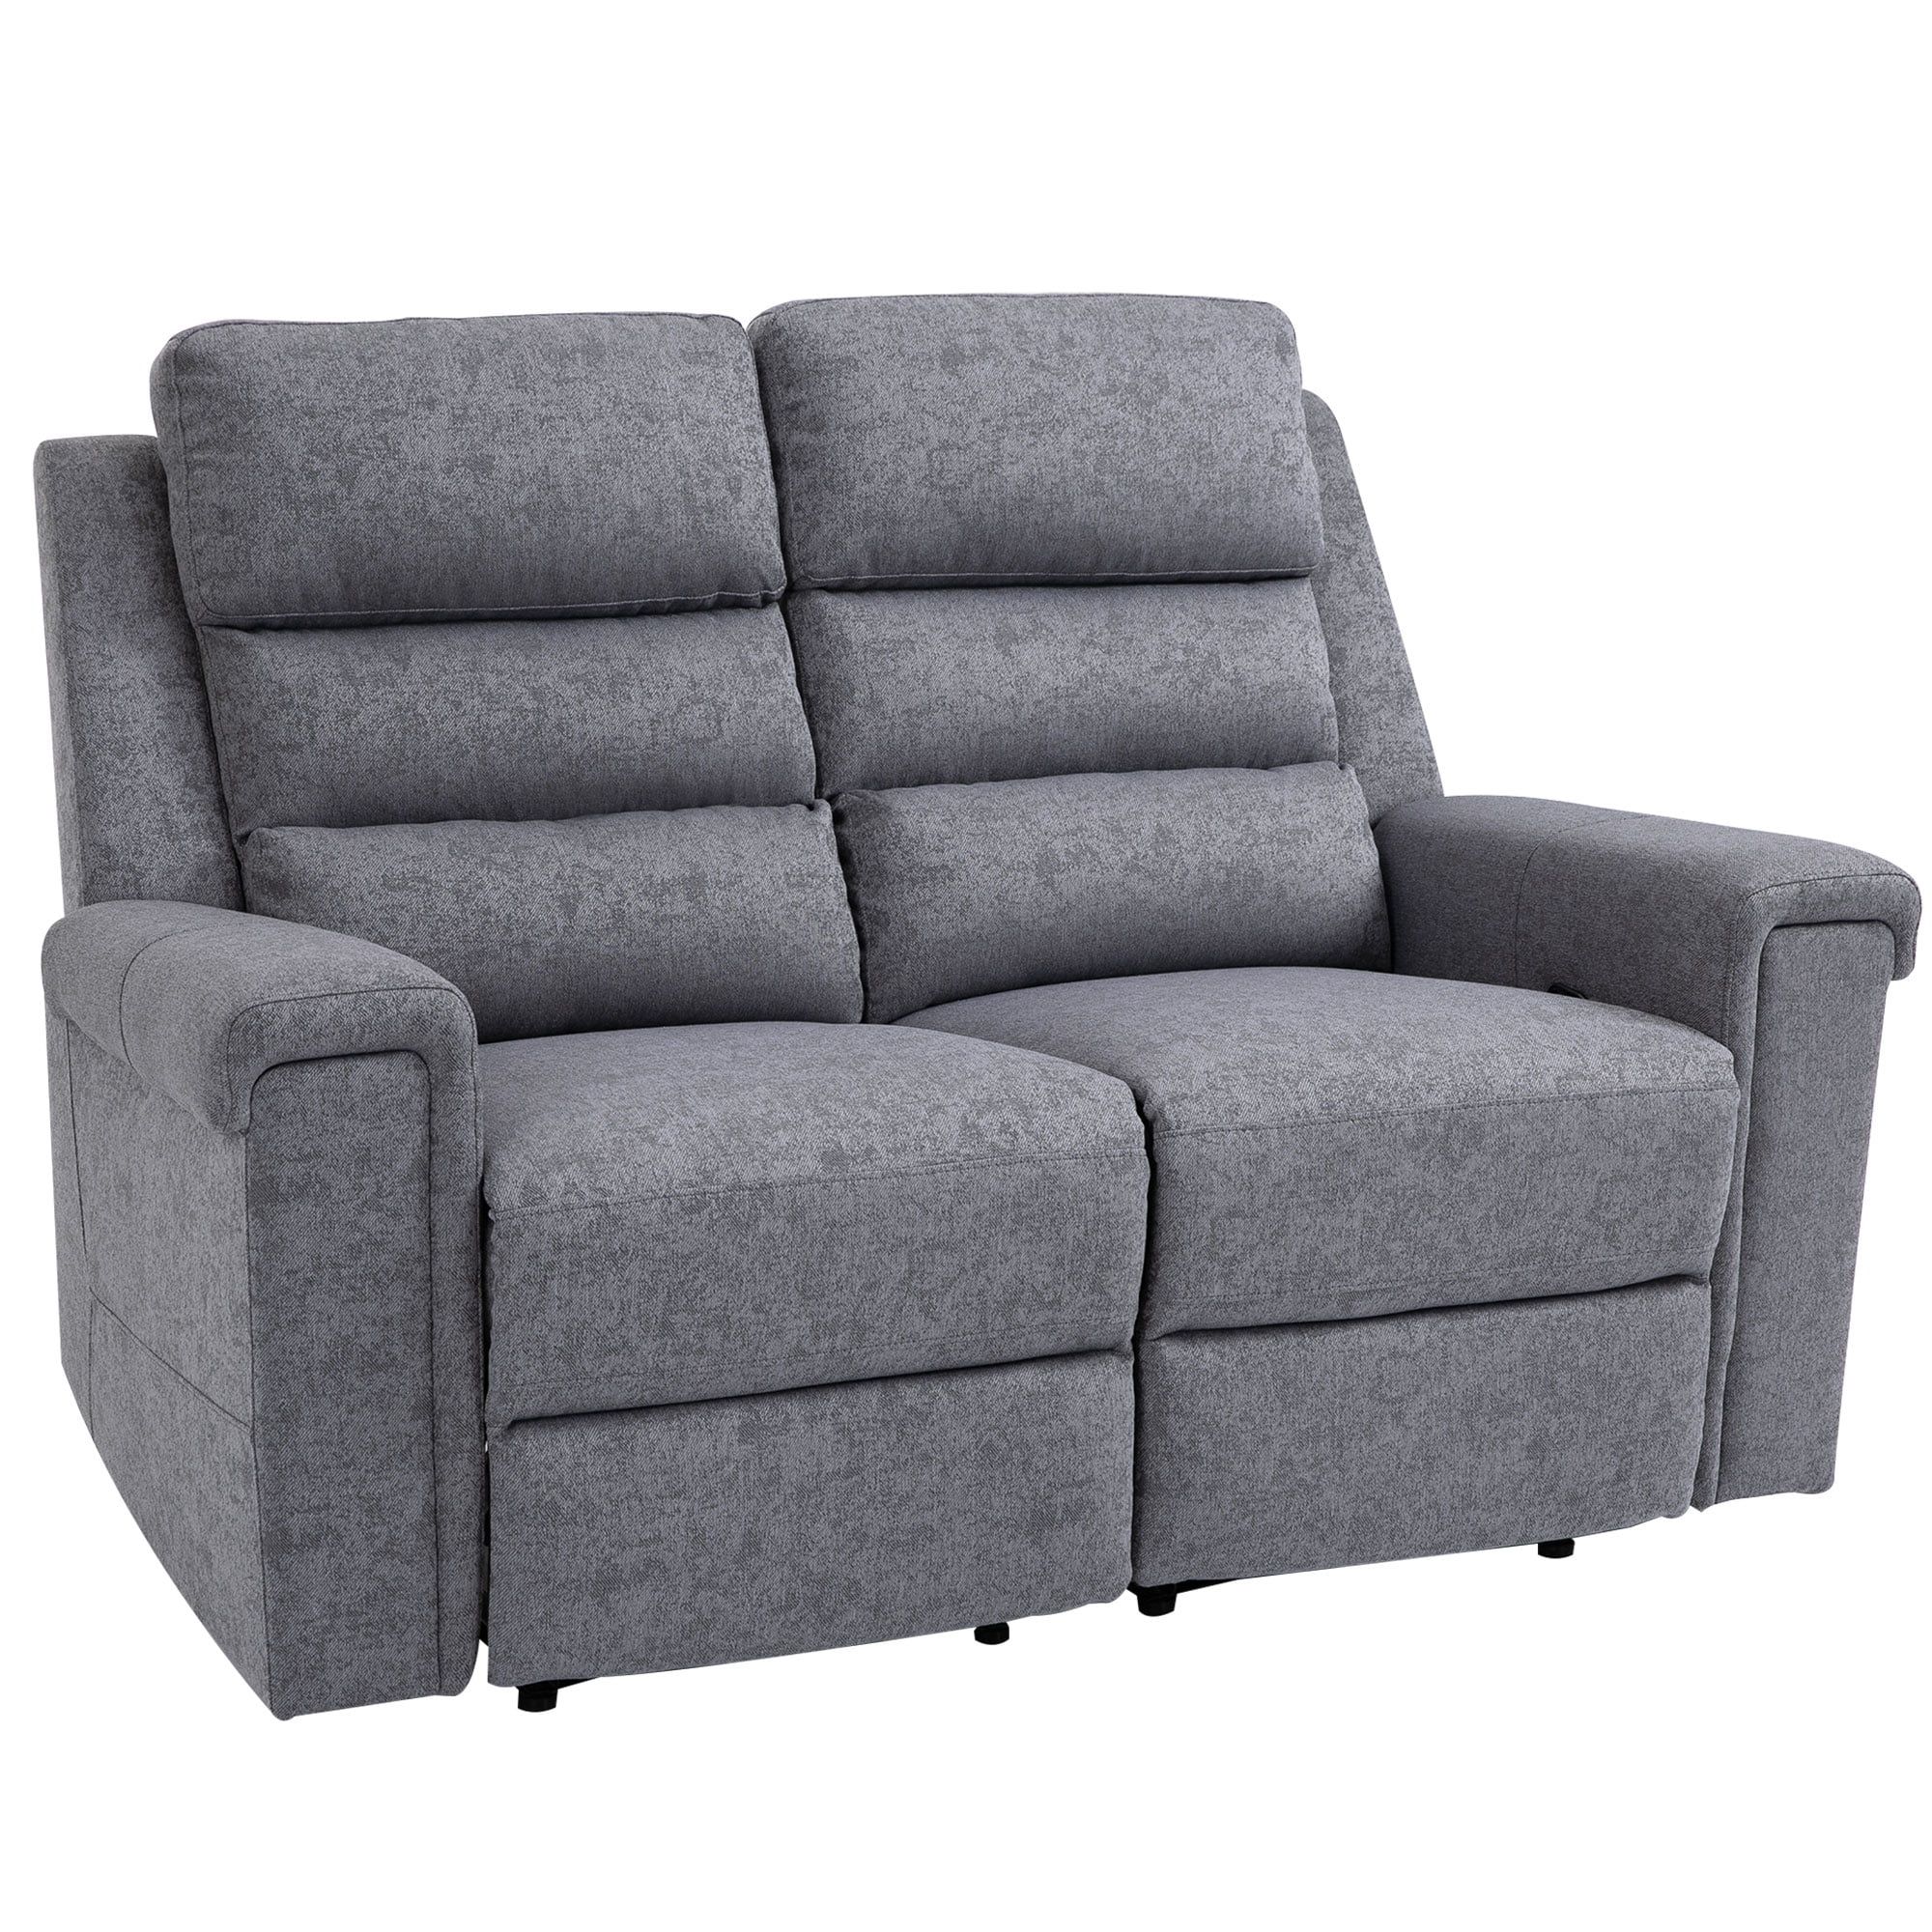 Homcom Modern 2 Seater Manual Reclining Sofa Loveseat Couch With Linen Throughout Modern Light Grey Loveseat Sofas (Gallery 17 of 20)